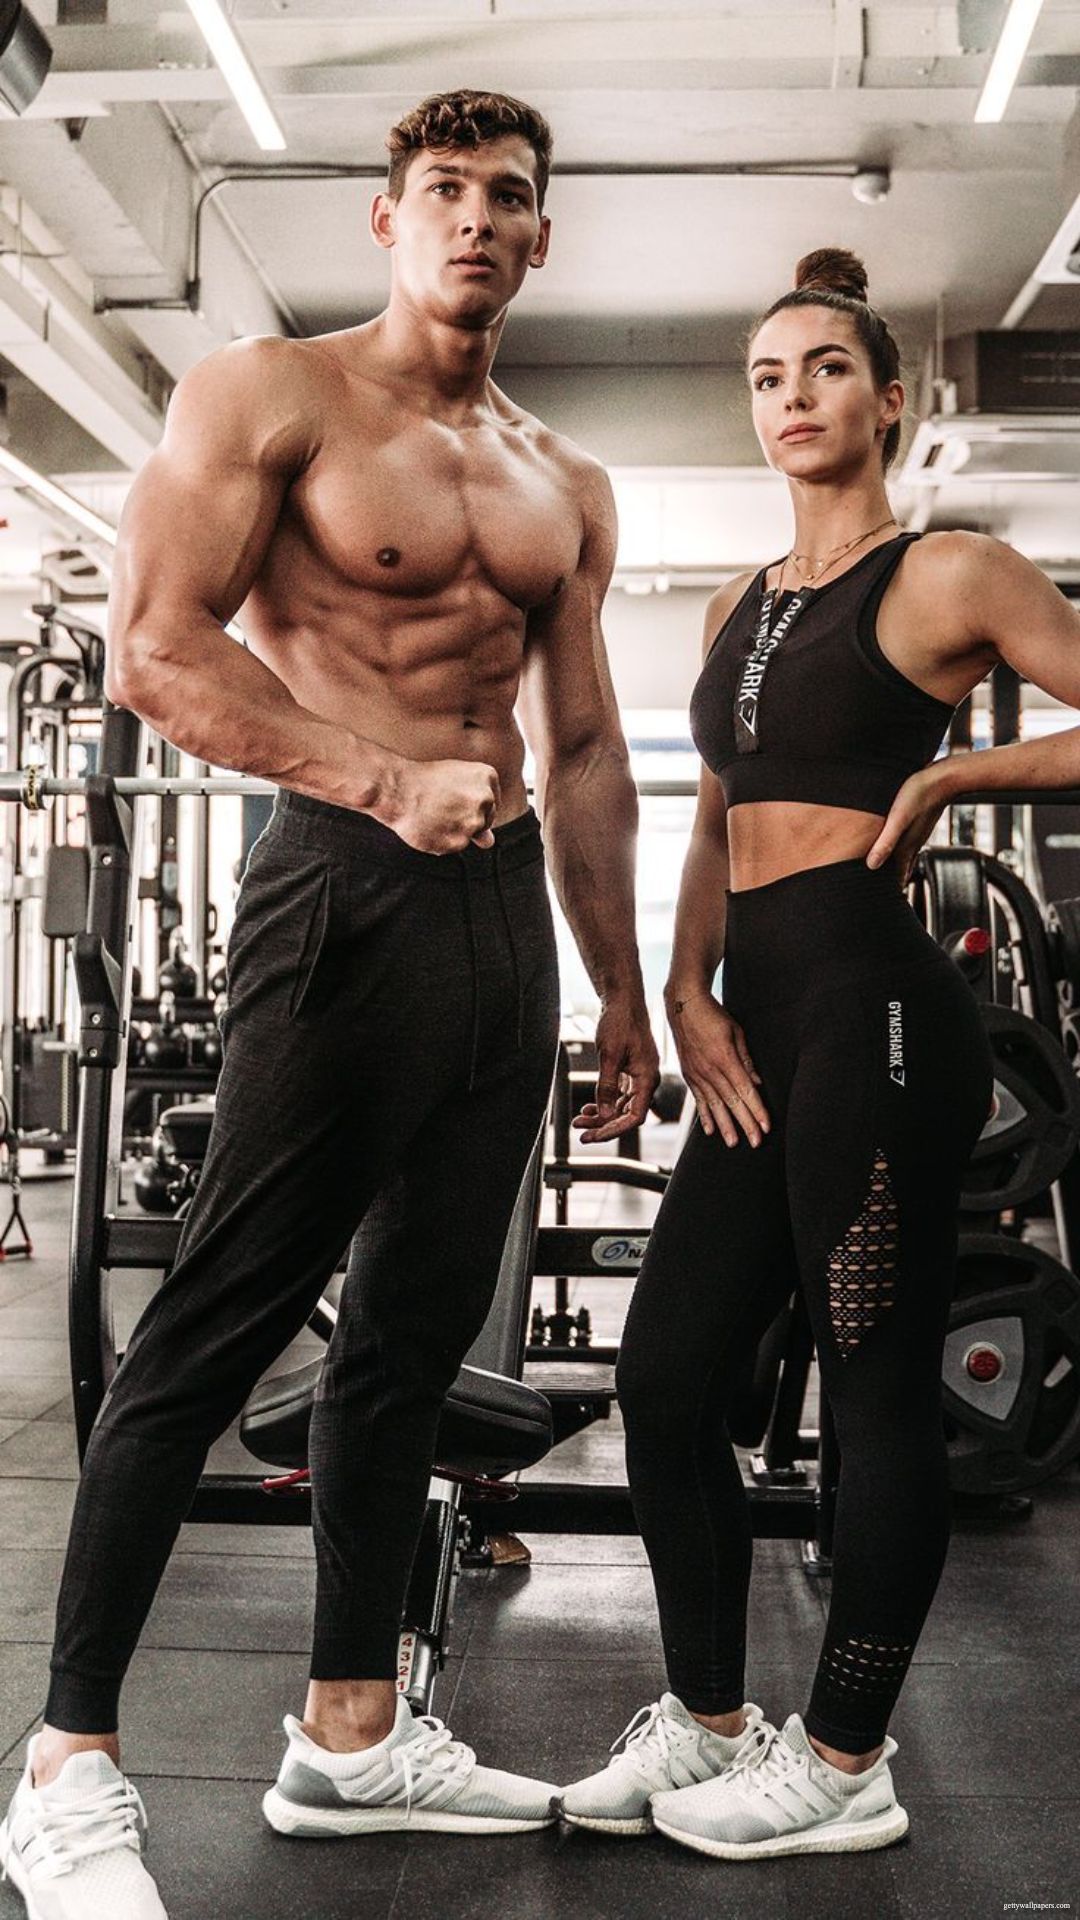 Wallpapers GYM Couple